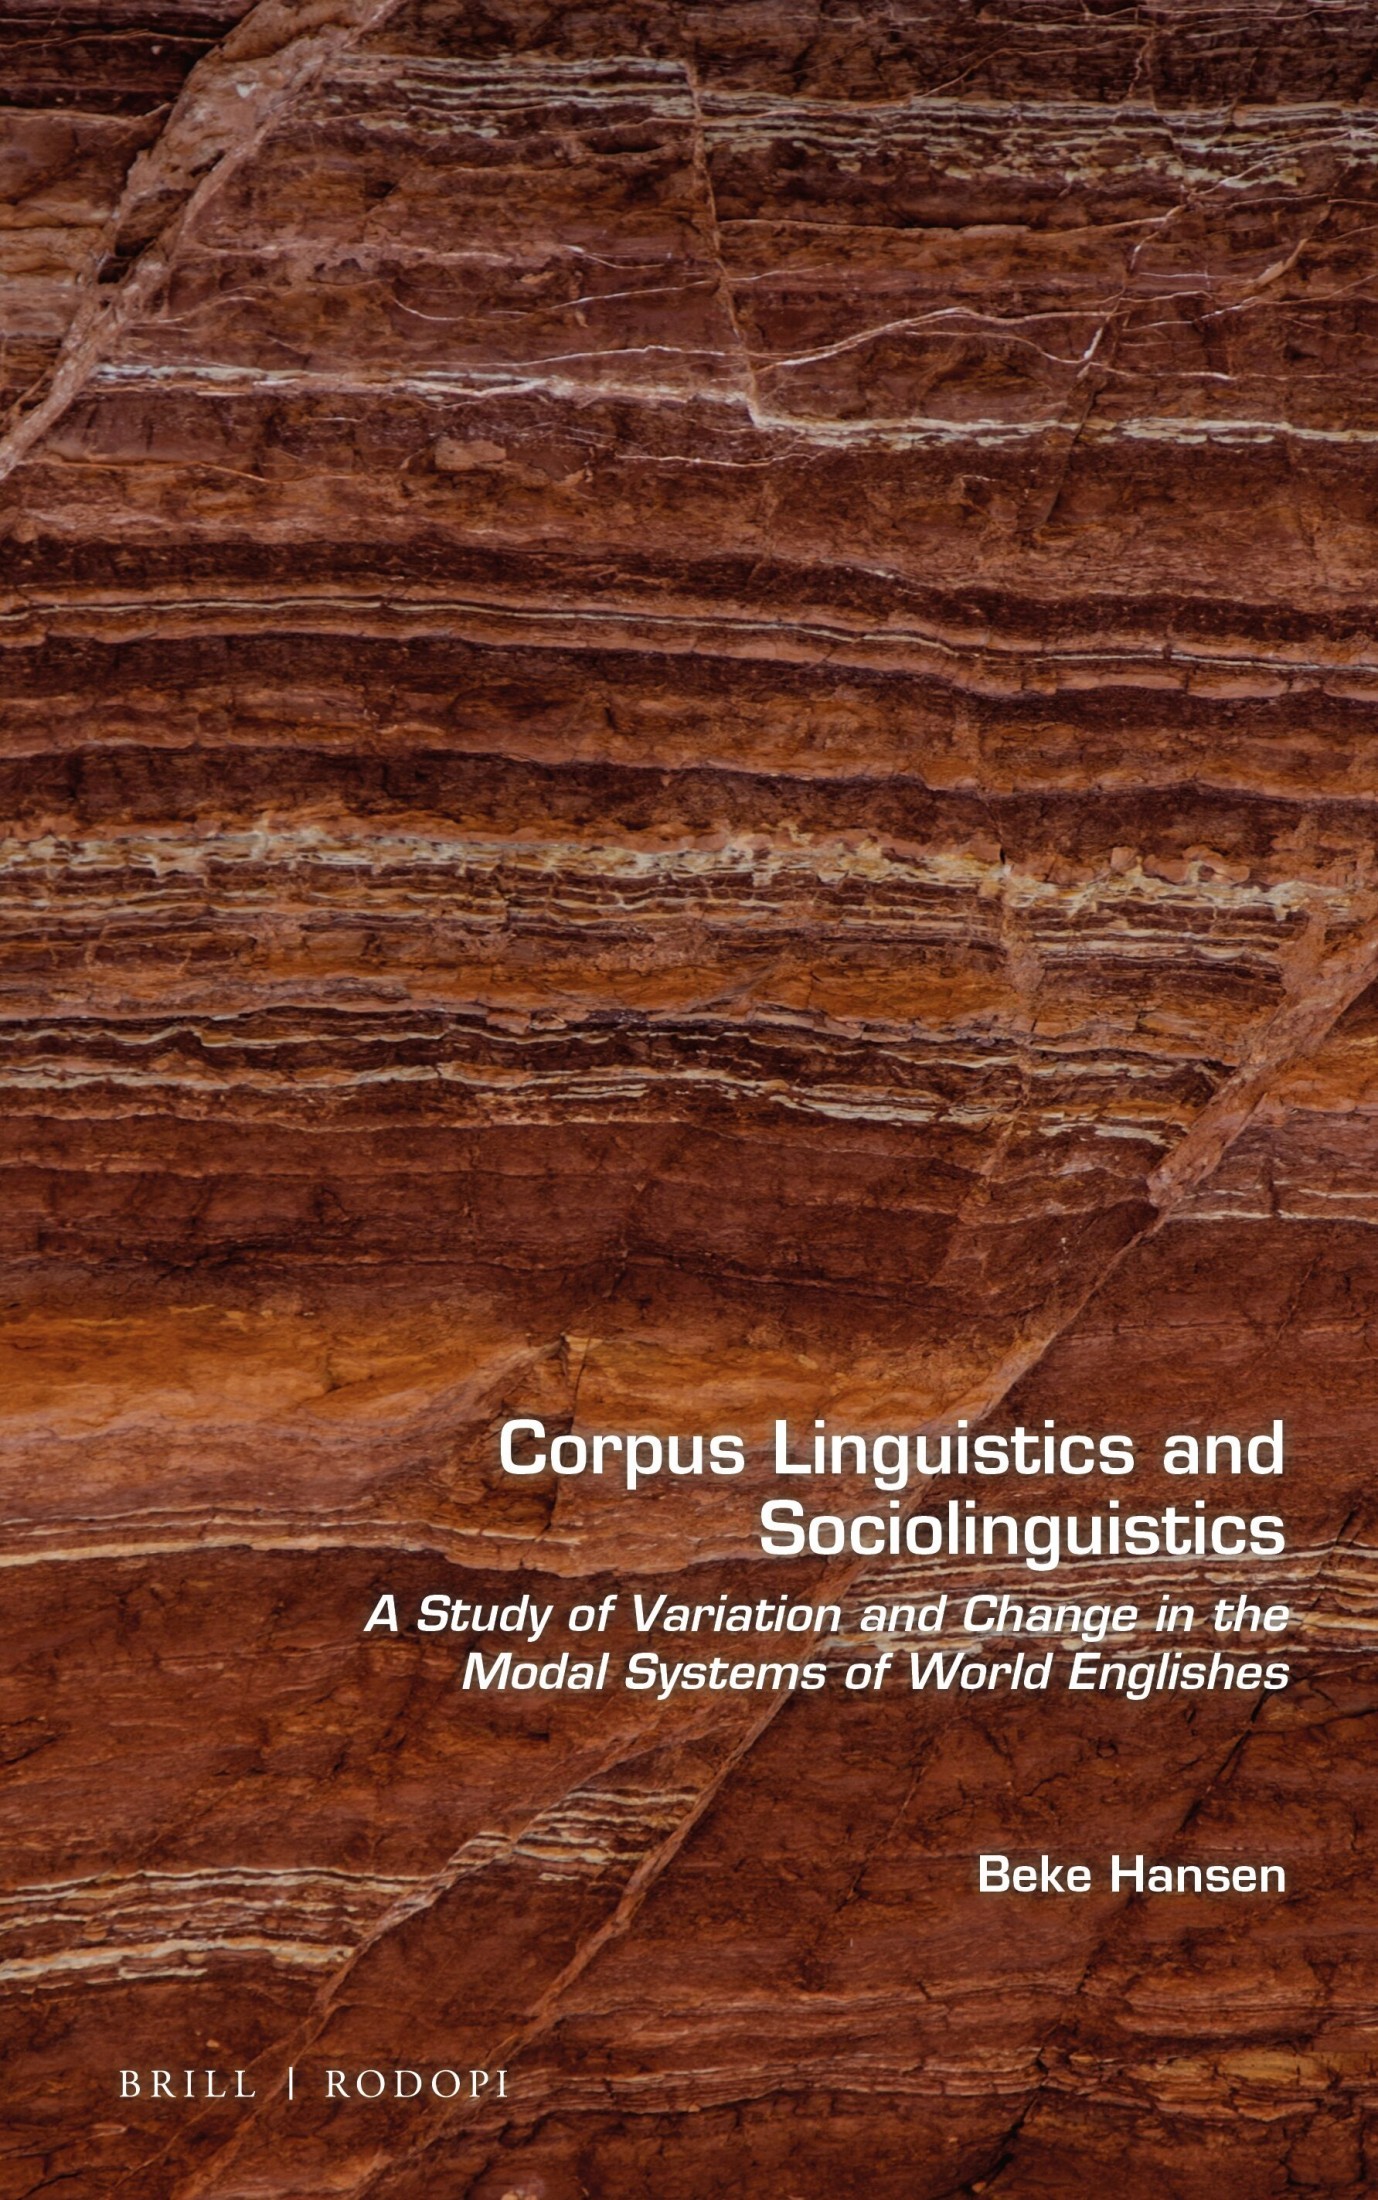 Corpus Linguistics and Sociolinguistics: A Study of Variation and Change in the Modal Systems of World Englishes